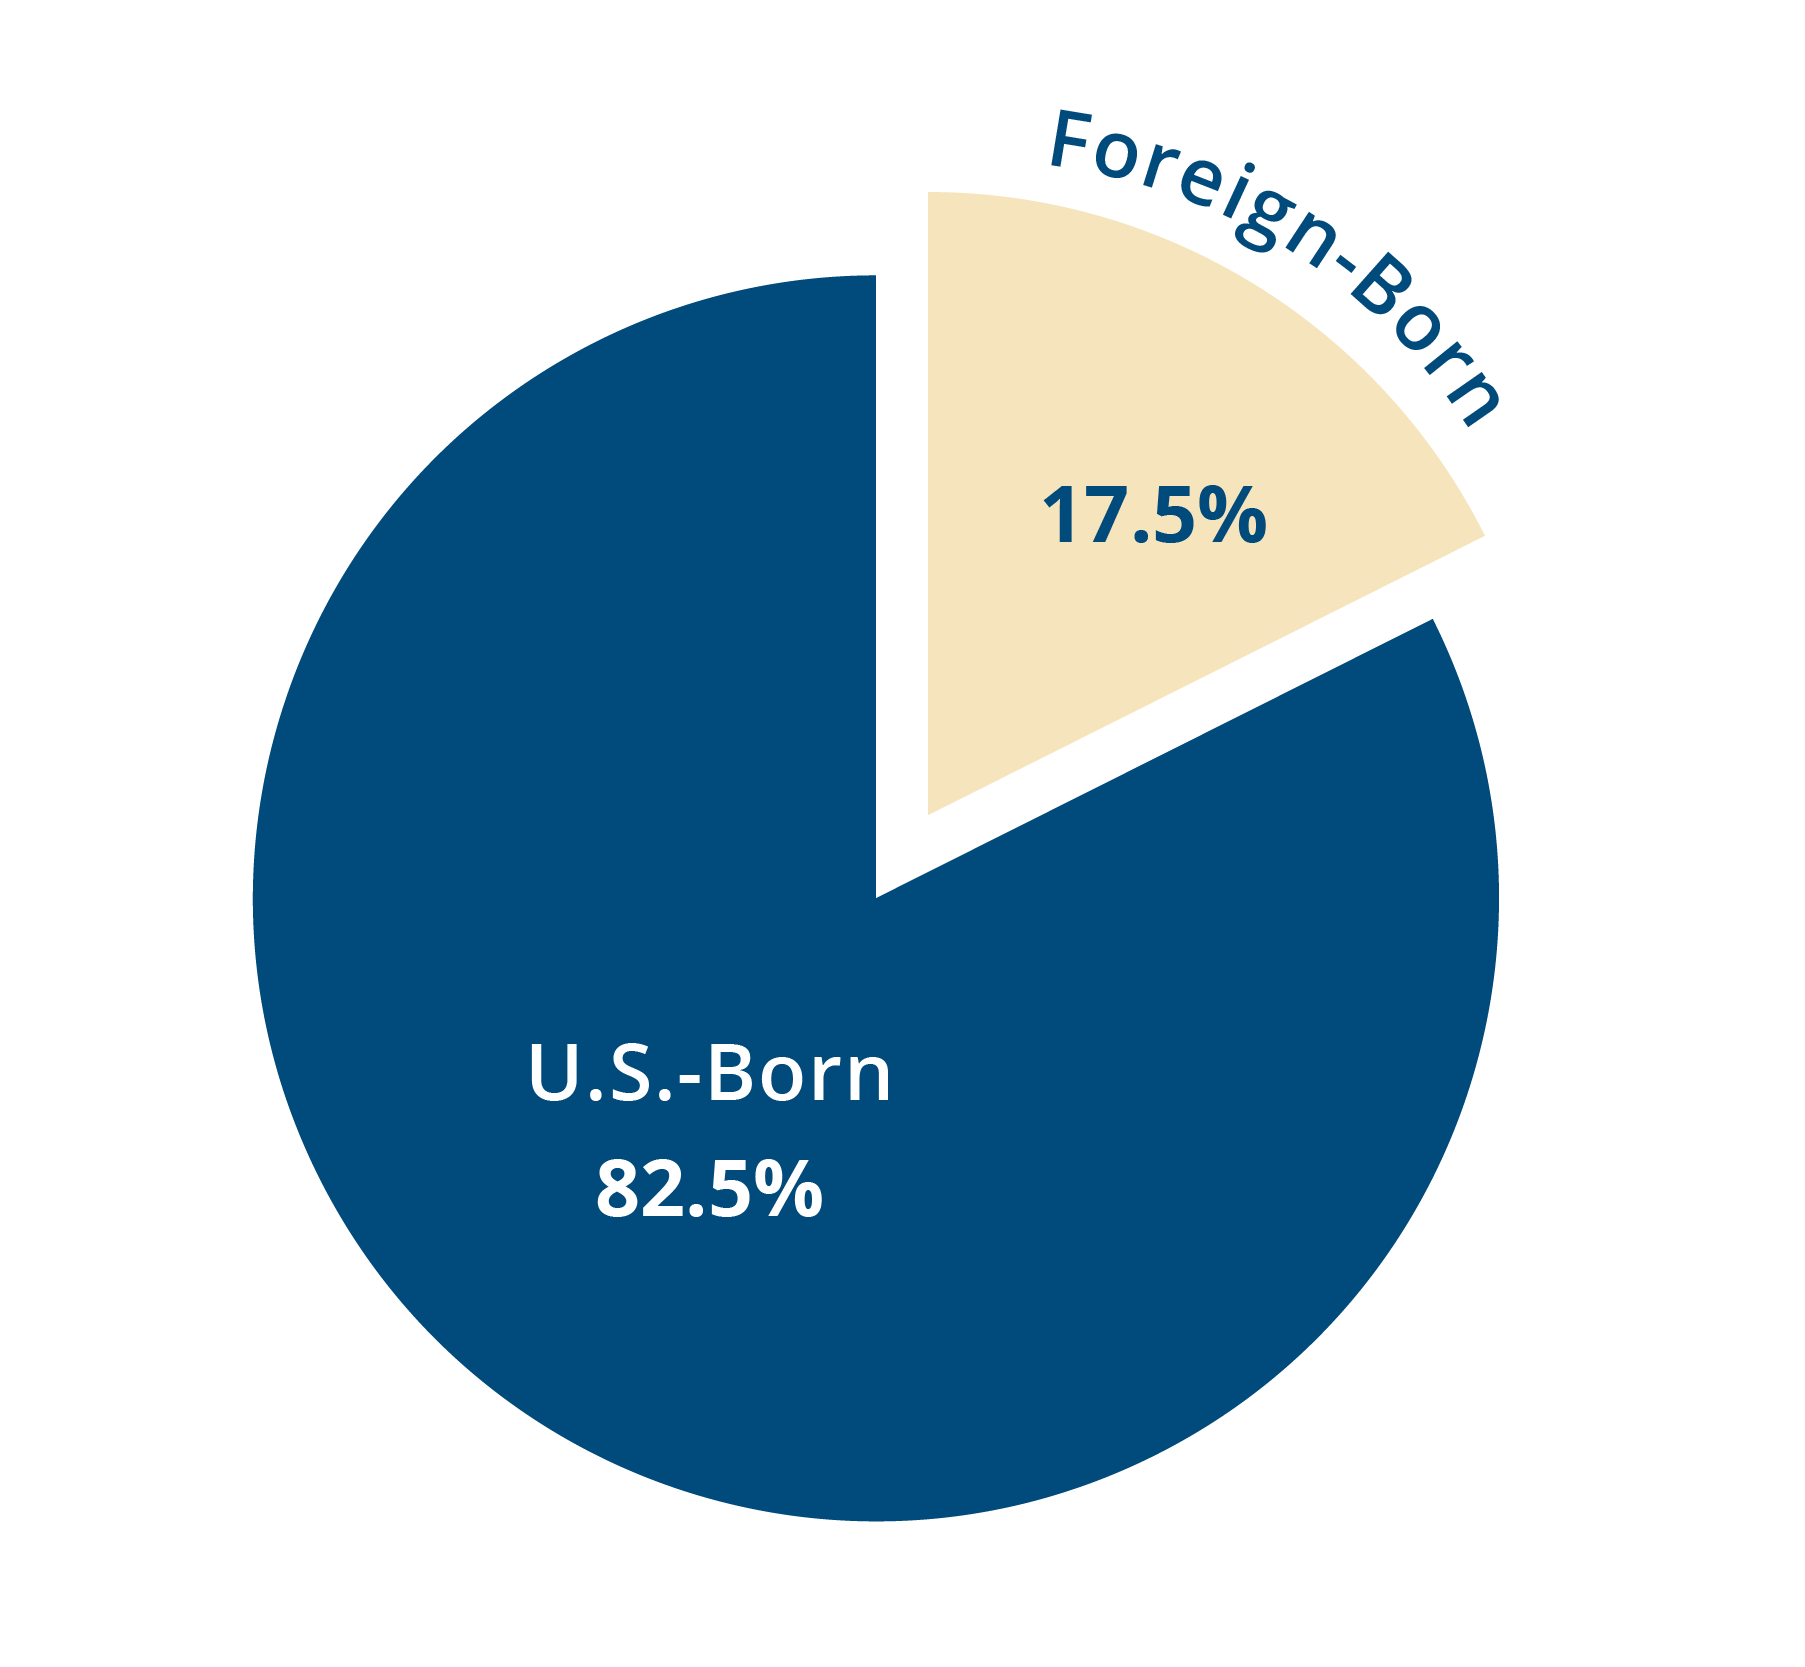 Pie chart depicting that 17.5% of Massachusetts residents are foreign-born, while 82.5% Massachusetts residents are U.S.-born.